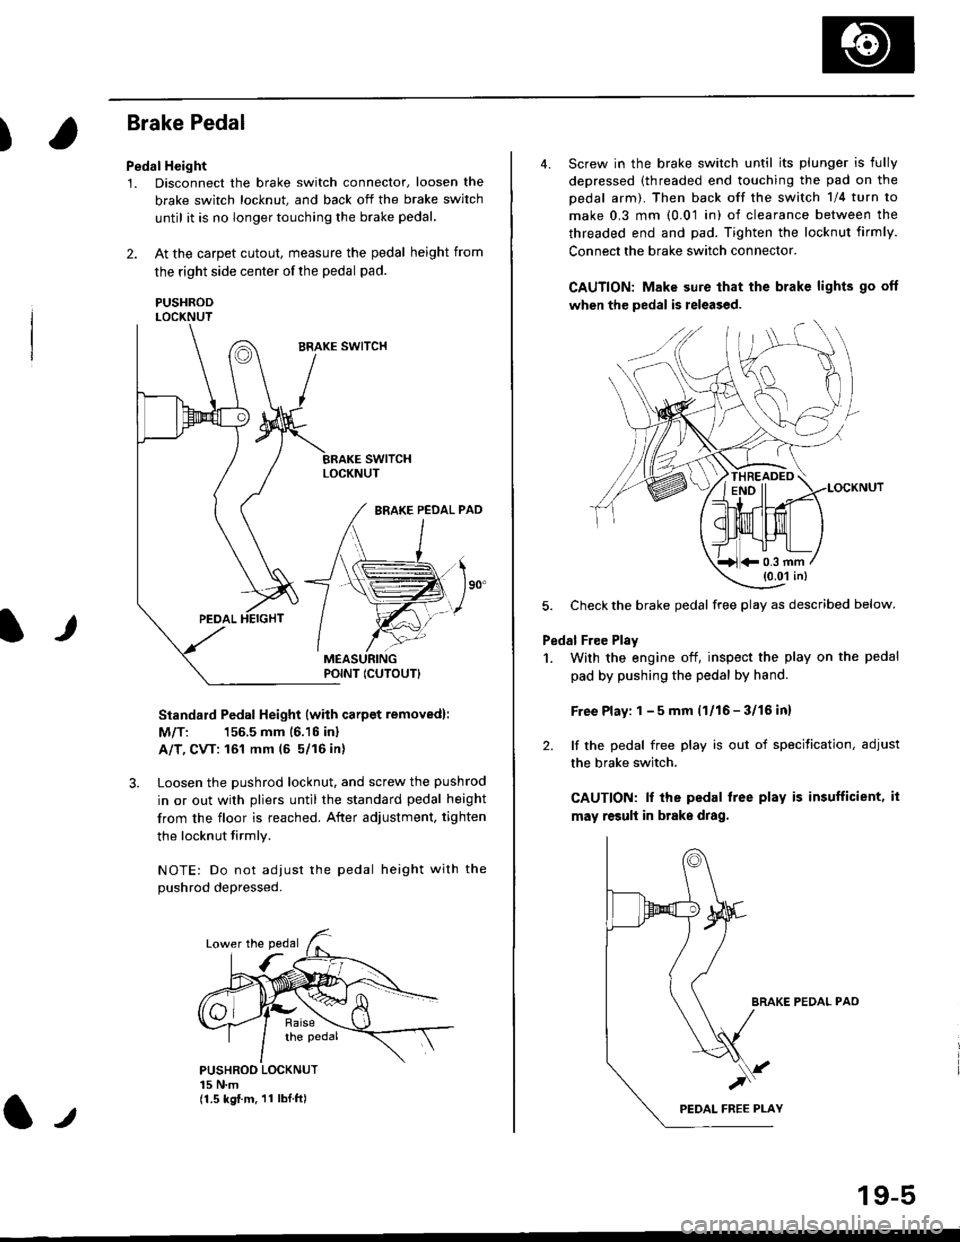 HONDA CIVIC 1996 6.G Workshop Manual )
Brake Pedal
Pedal Height
1. Disconnect the brake switch connector, loosen the
brake switch locknut, and back off the brake switch
until it is no longer touching the brake pedal,
2. At the carpet cut